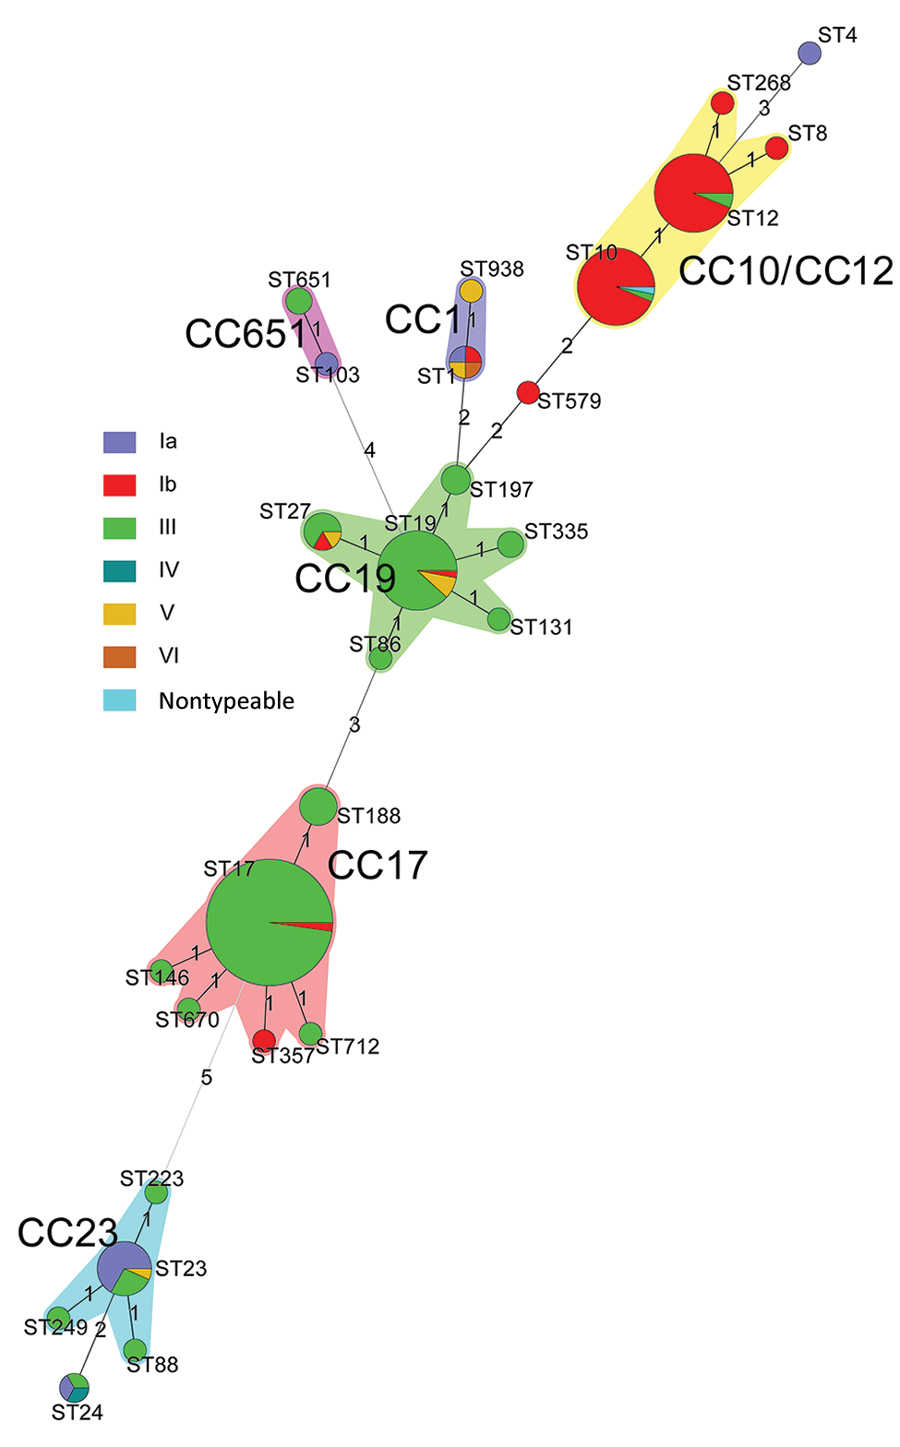 Minimum spanning tree of invasive group B Streptococcus (GBS) isolates by serotype showing the relationship between ST and clonal complex CC by serotype. Circles represent STs; size of each circle indicates the number of isolates within the specific type. The ST with the greatest number of single-locus variants is the founder ST. GBS isolate serotypes appear as different colors; shading denotes STs belonging to the same CC. CC, clonal complex; ST, sequence type.